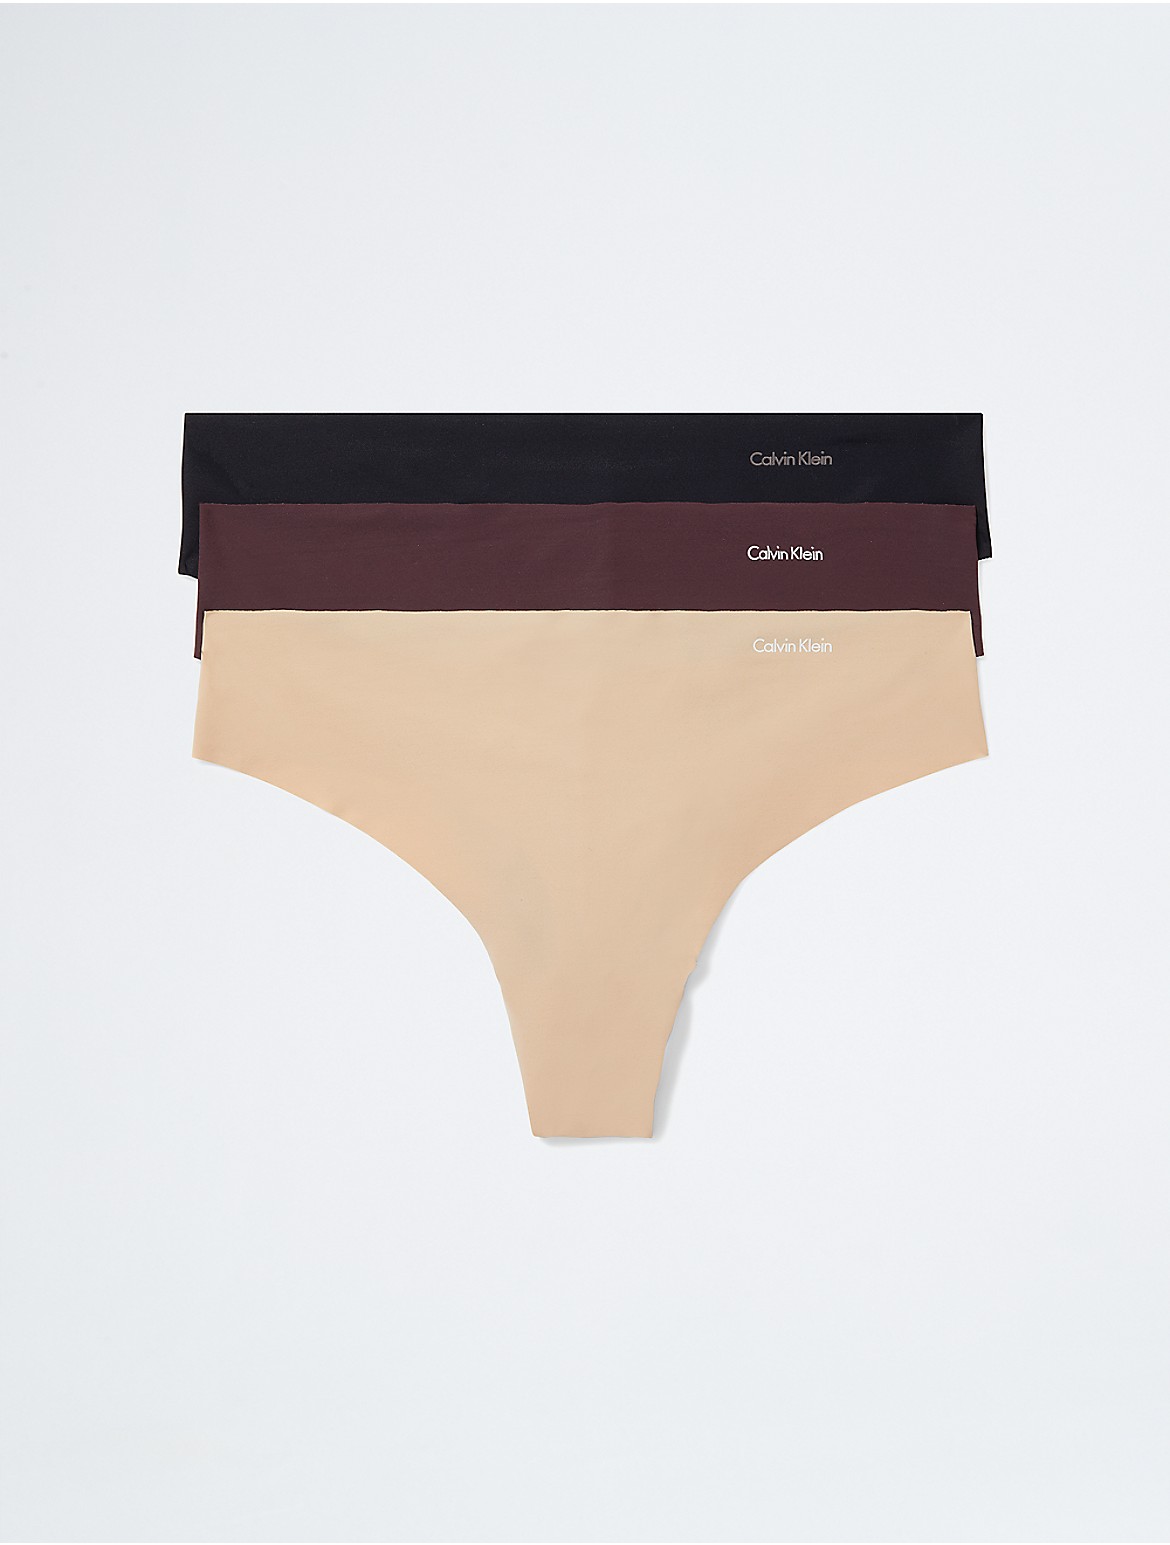 Calvin Klein Women's Invisibles 3-Pack Thong - Multi - XL